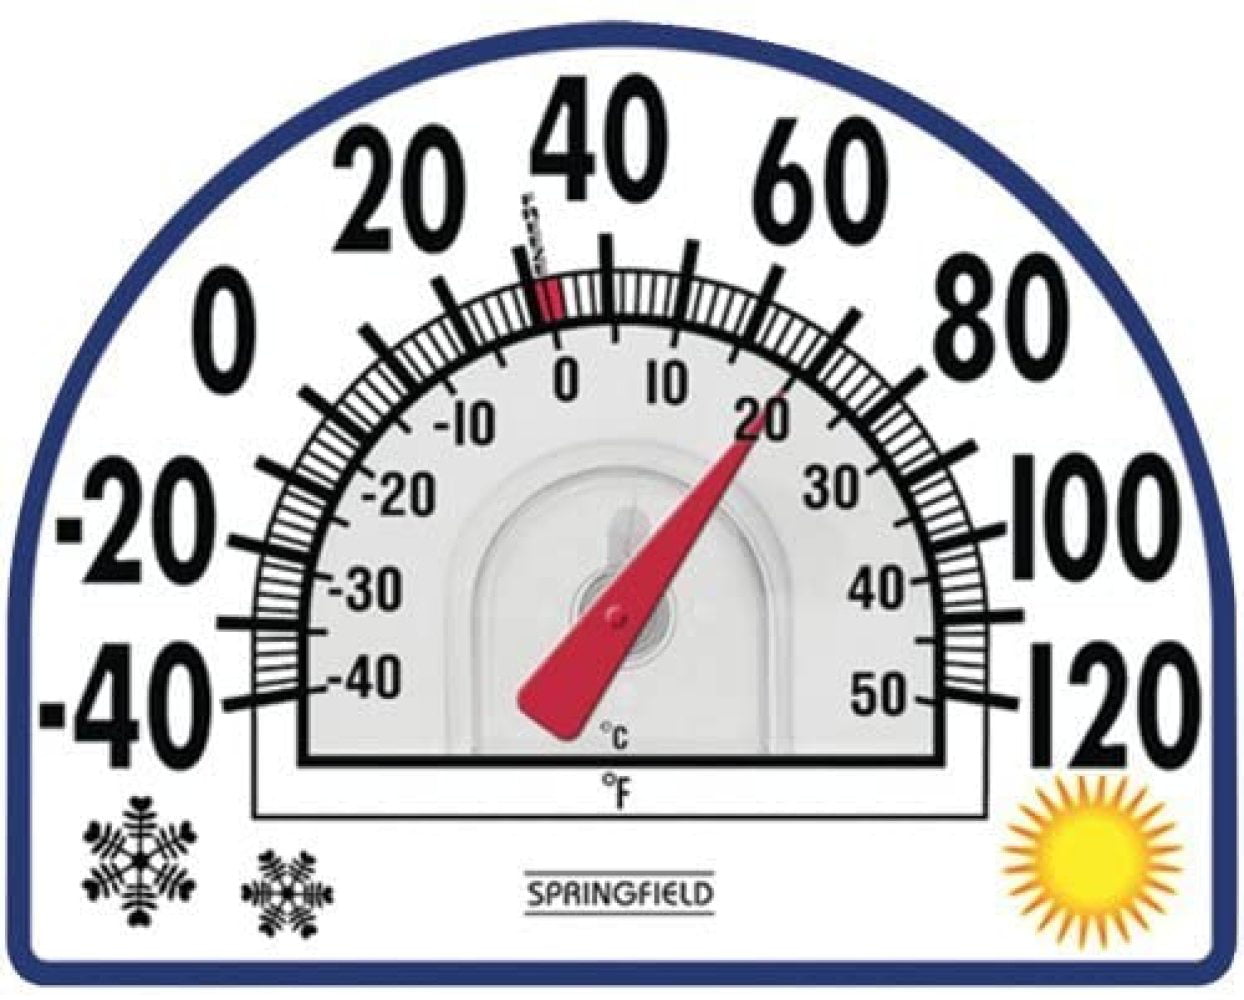 2 Lot of SPRINGFIELD 91157 Window Cling Thermometer,outdoor temperature reading 